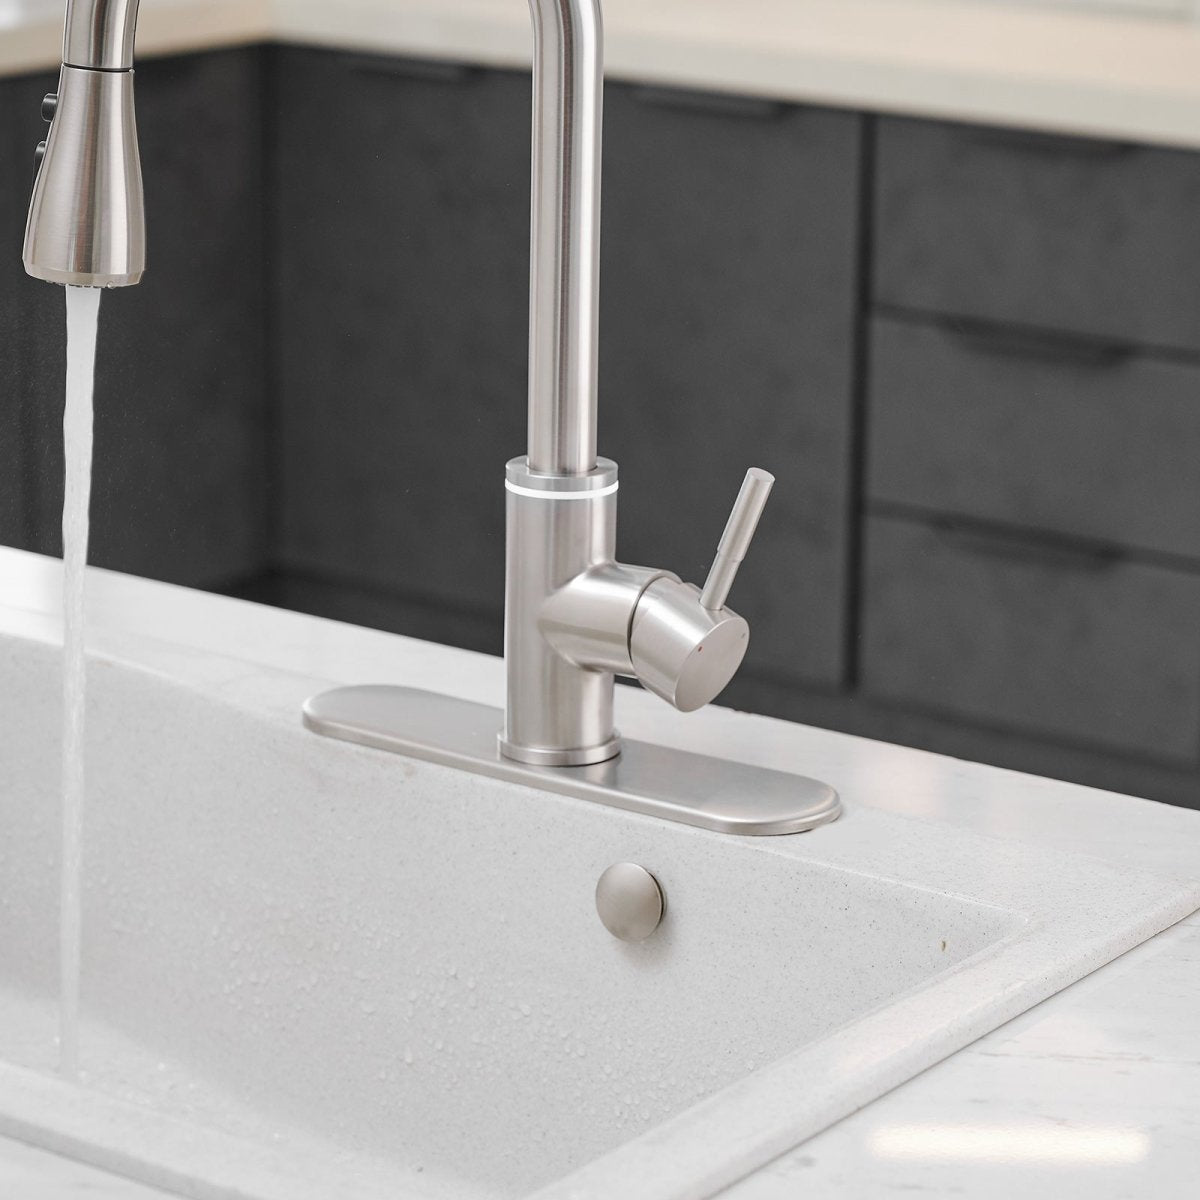 Single Handle Pull-Out Sprayer Kitchen Faucet Brushed Nickel - buyfaucet.com